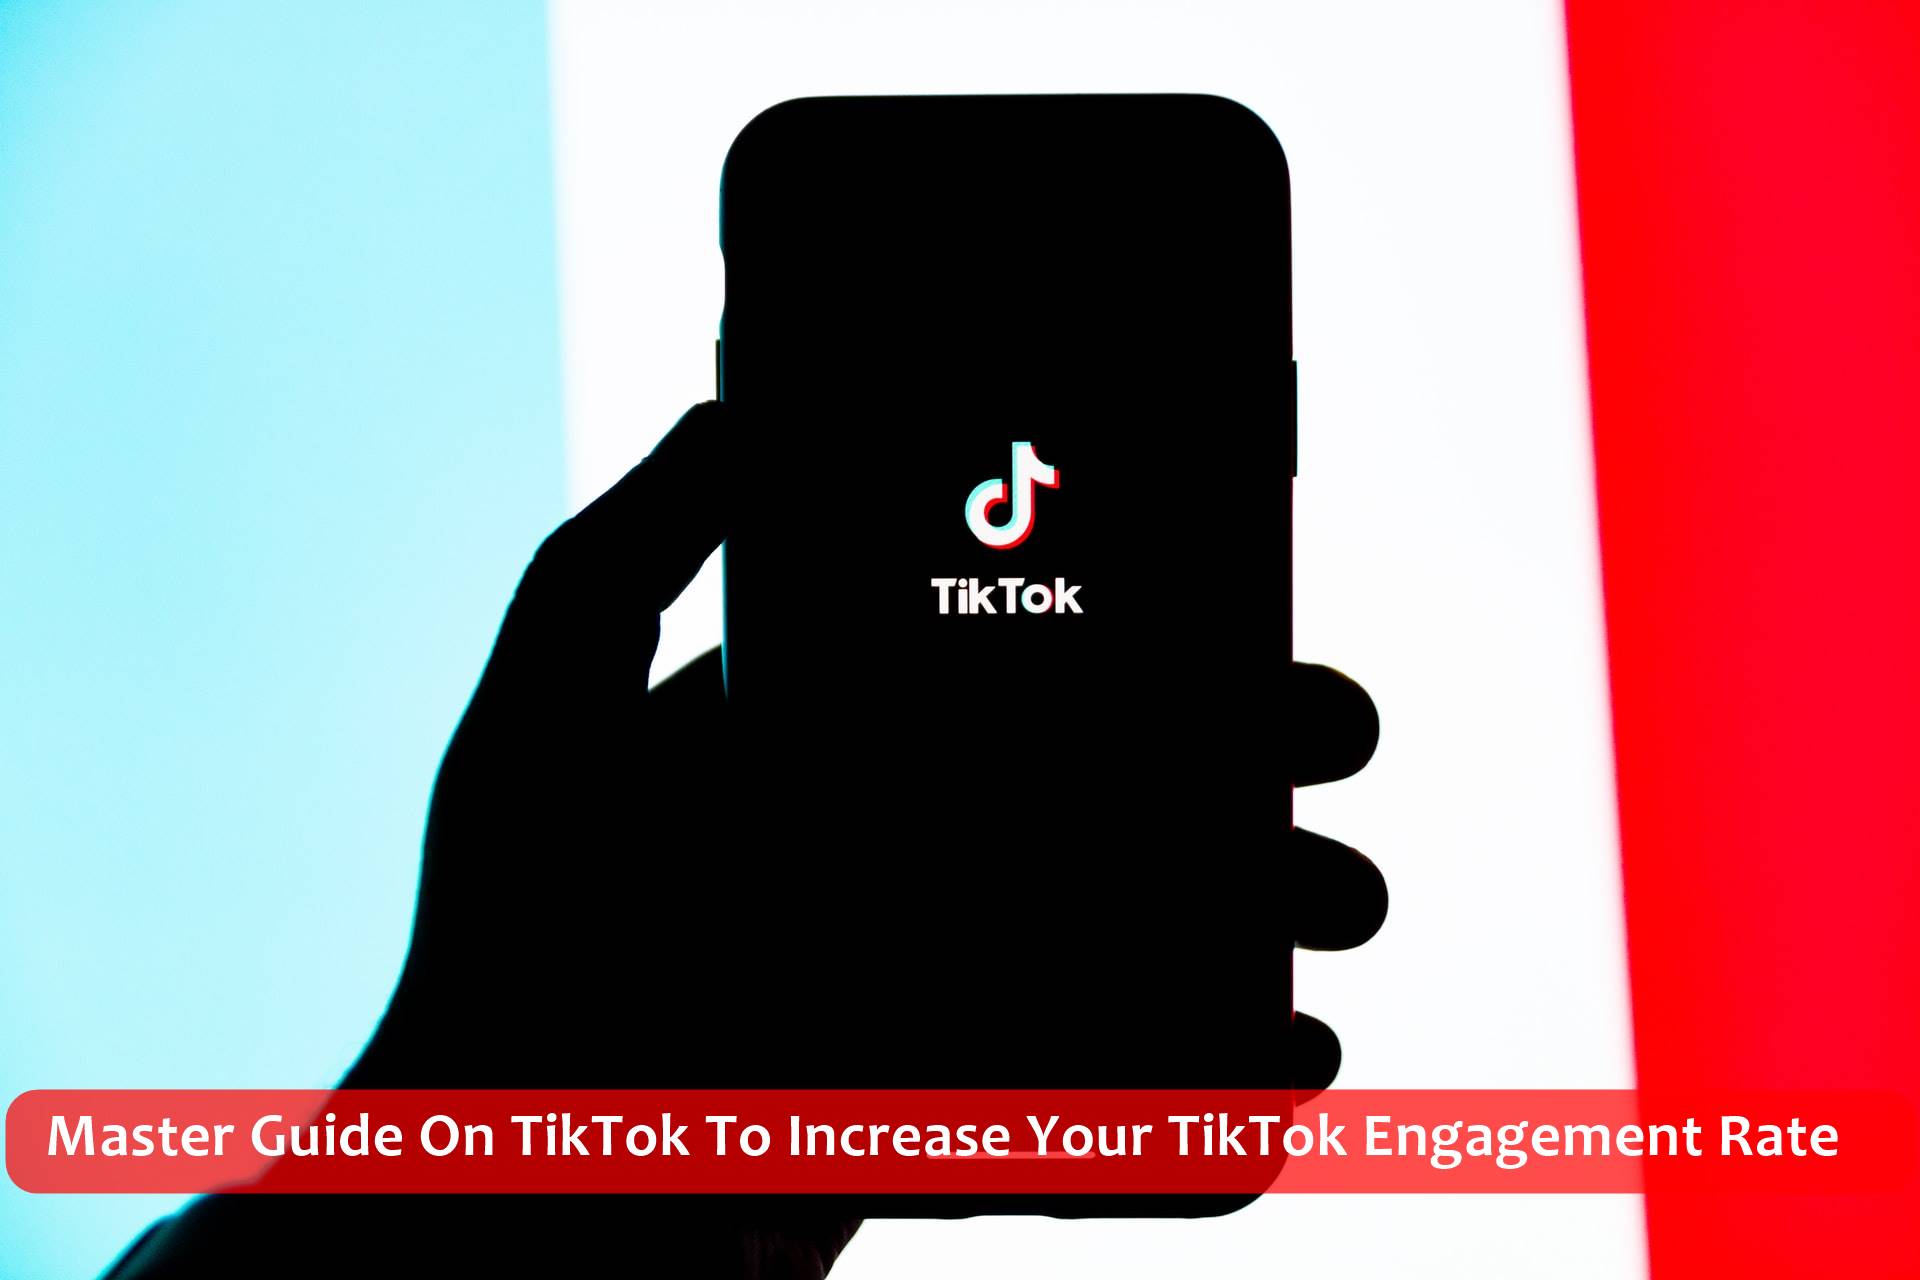 Master Guide On TikTok To Increase Your TikTok Engagement Rate